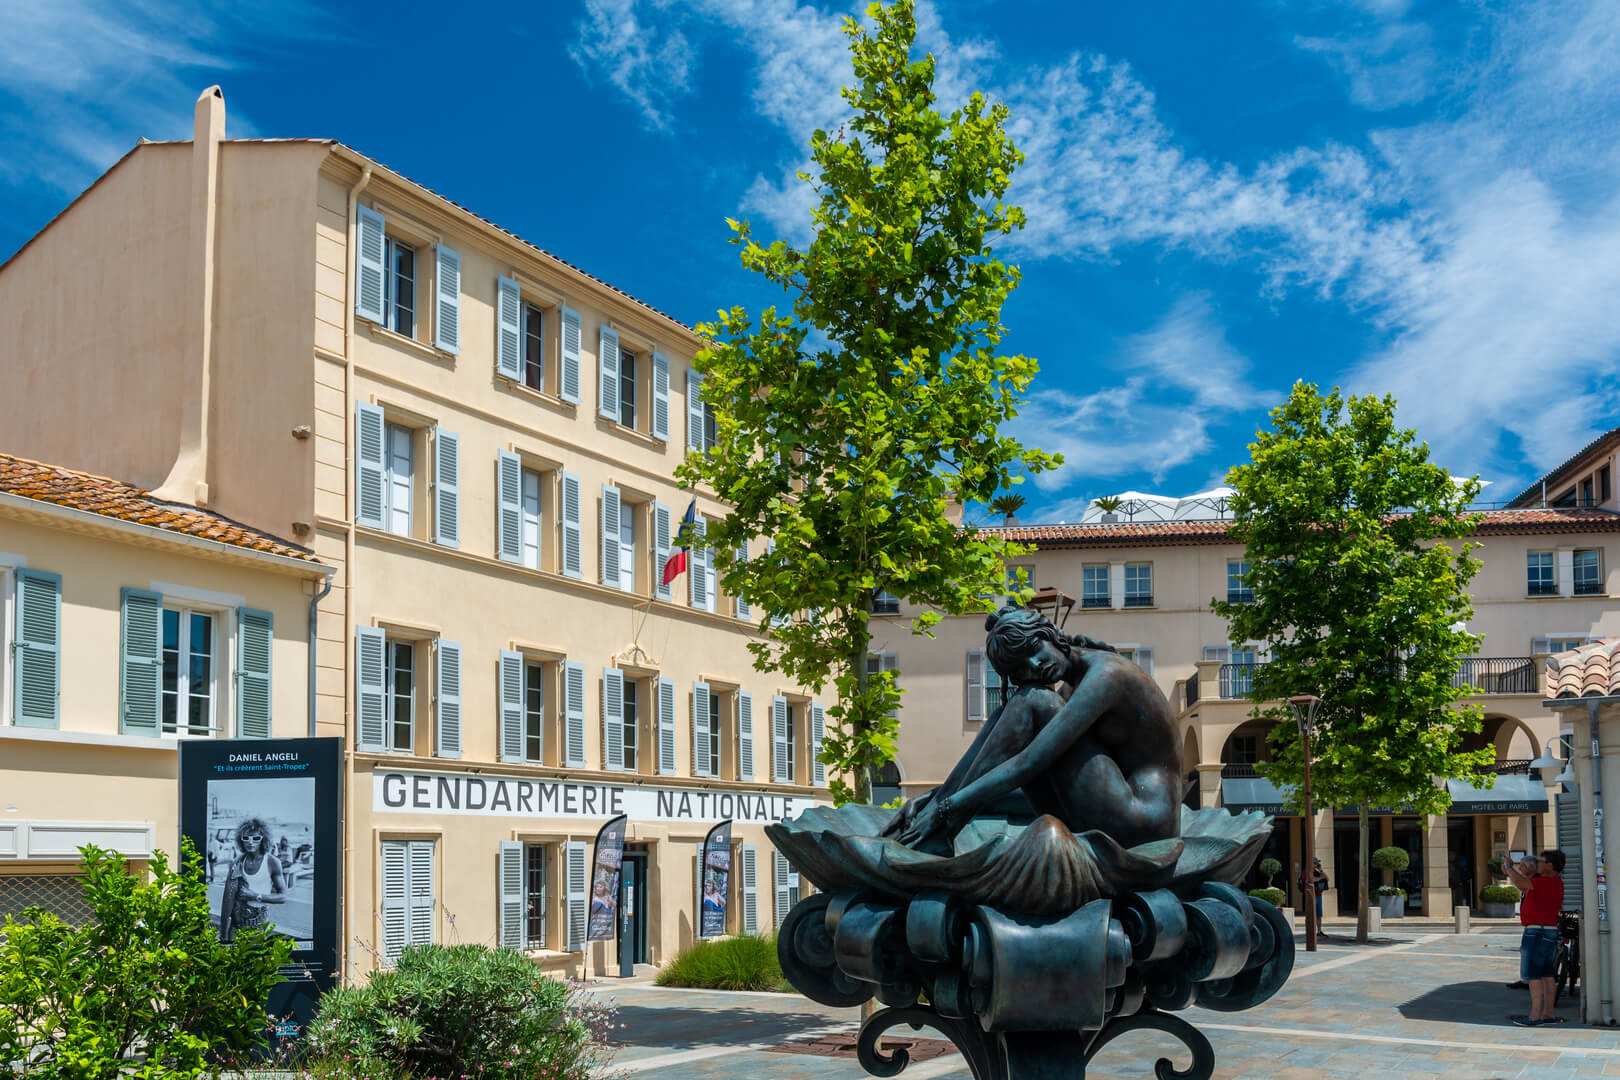 Museum of the gendarmerie and cinema of Saint-Tropez. One of the most visited places in the city.